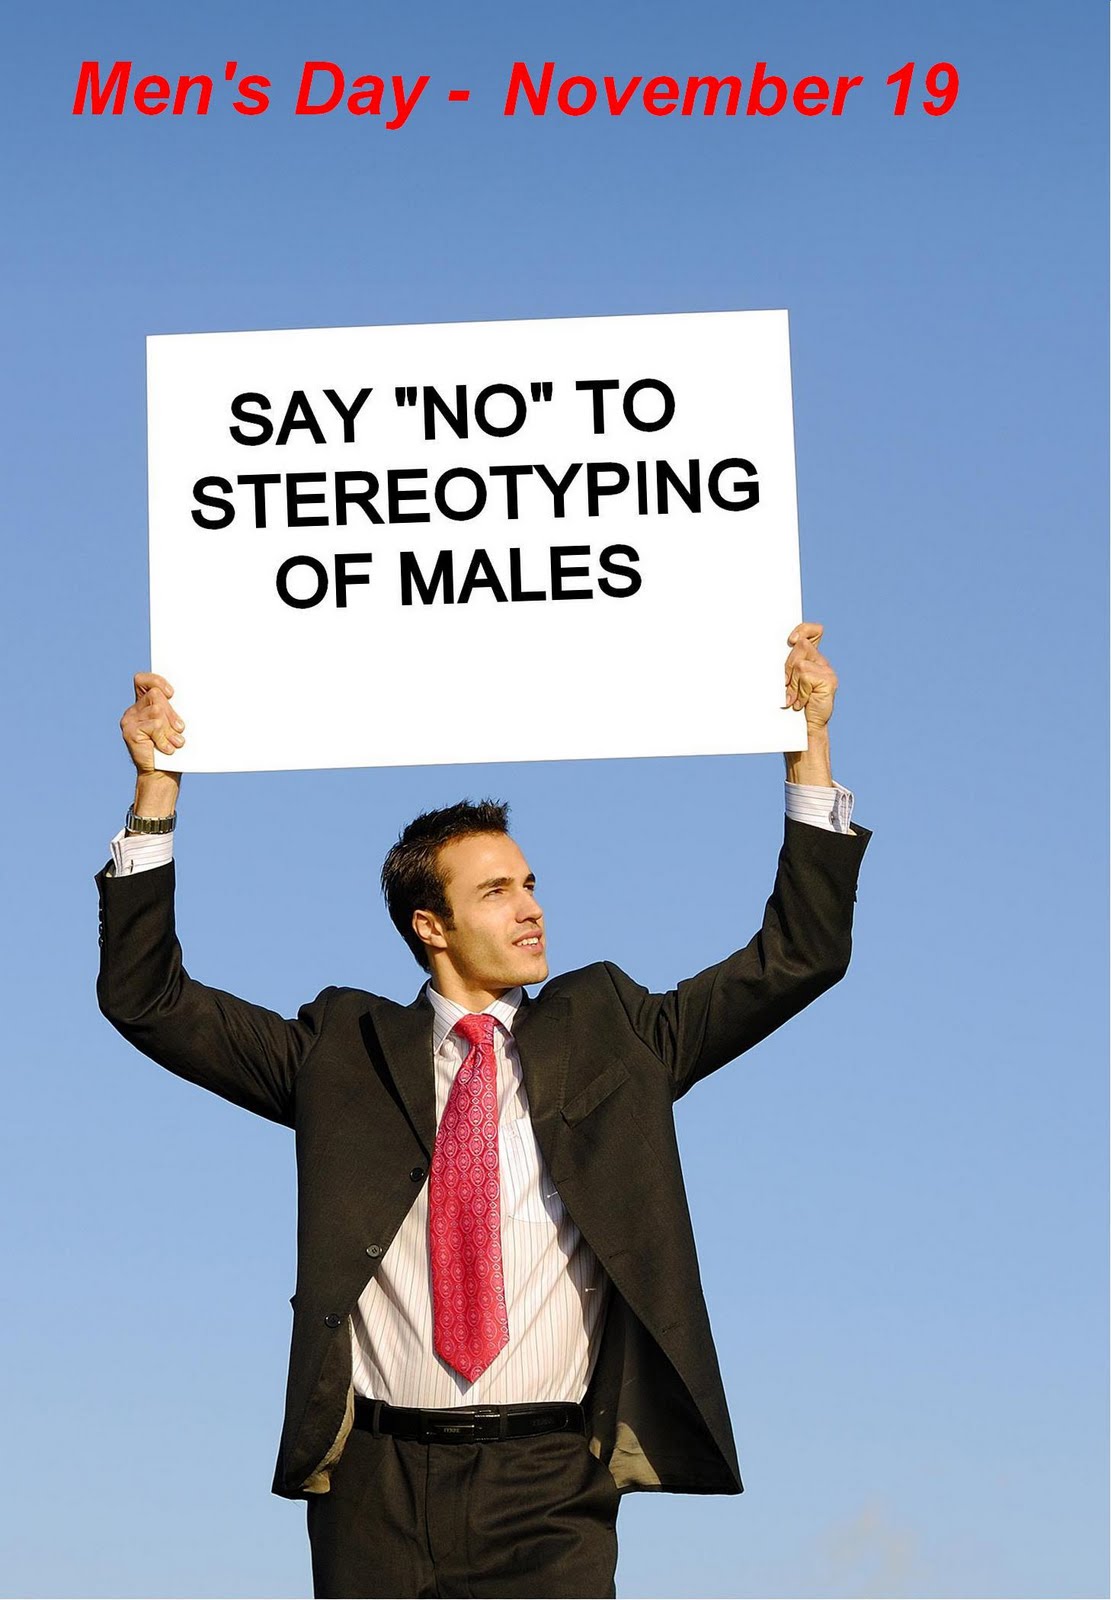 Men’s Day november 19 Say no to stereotyping of males poster image